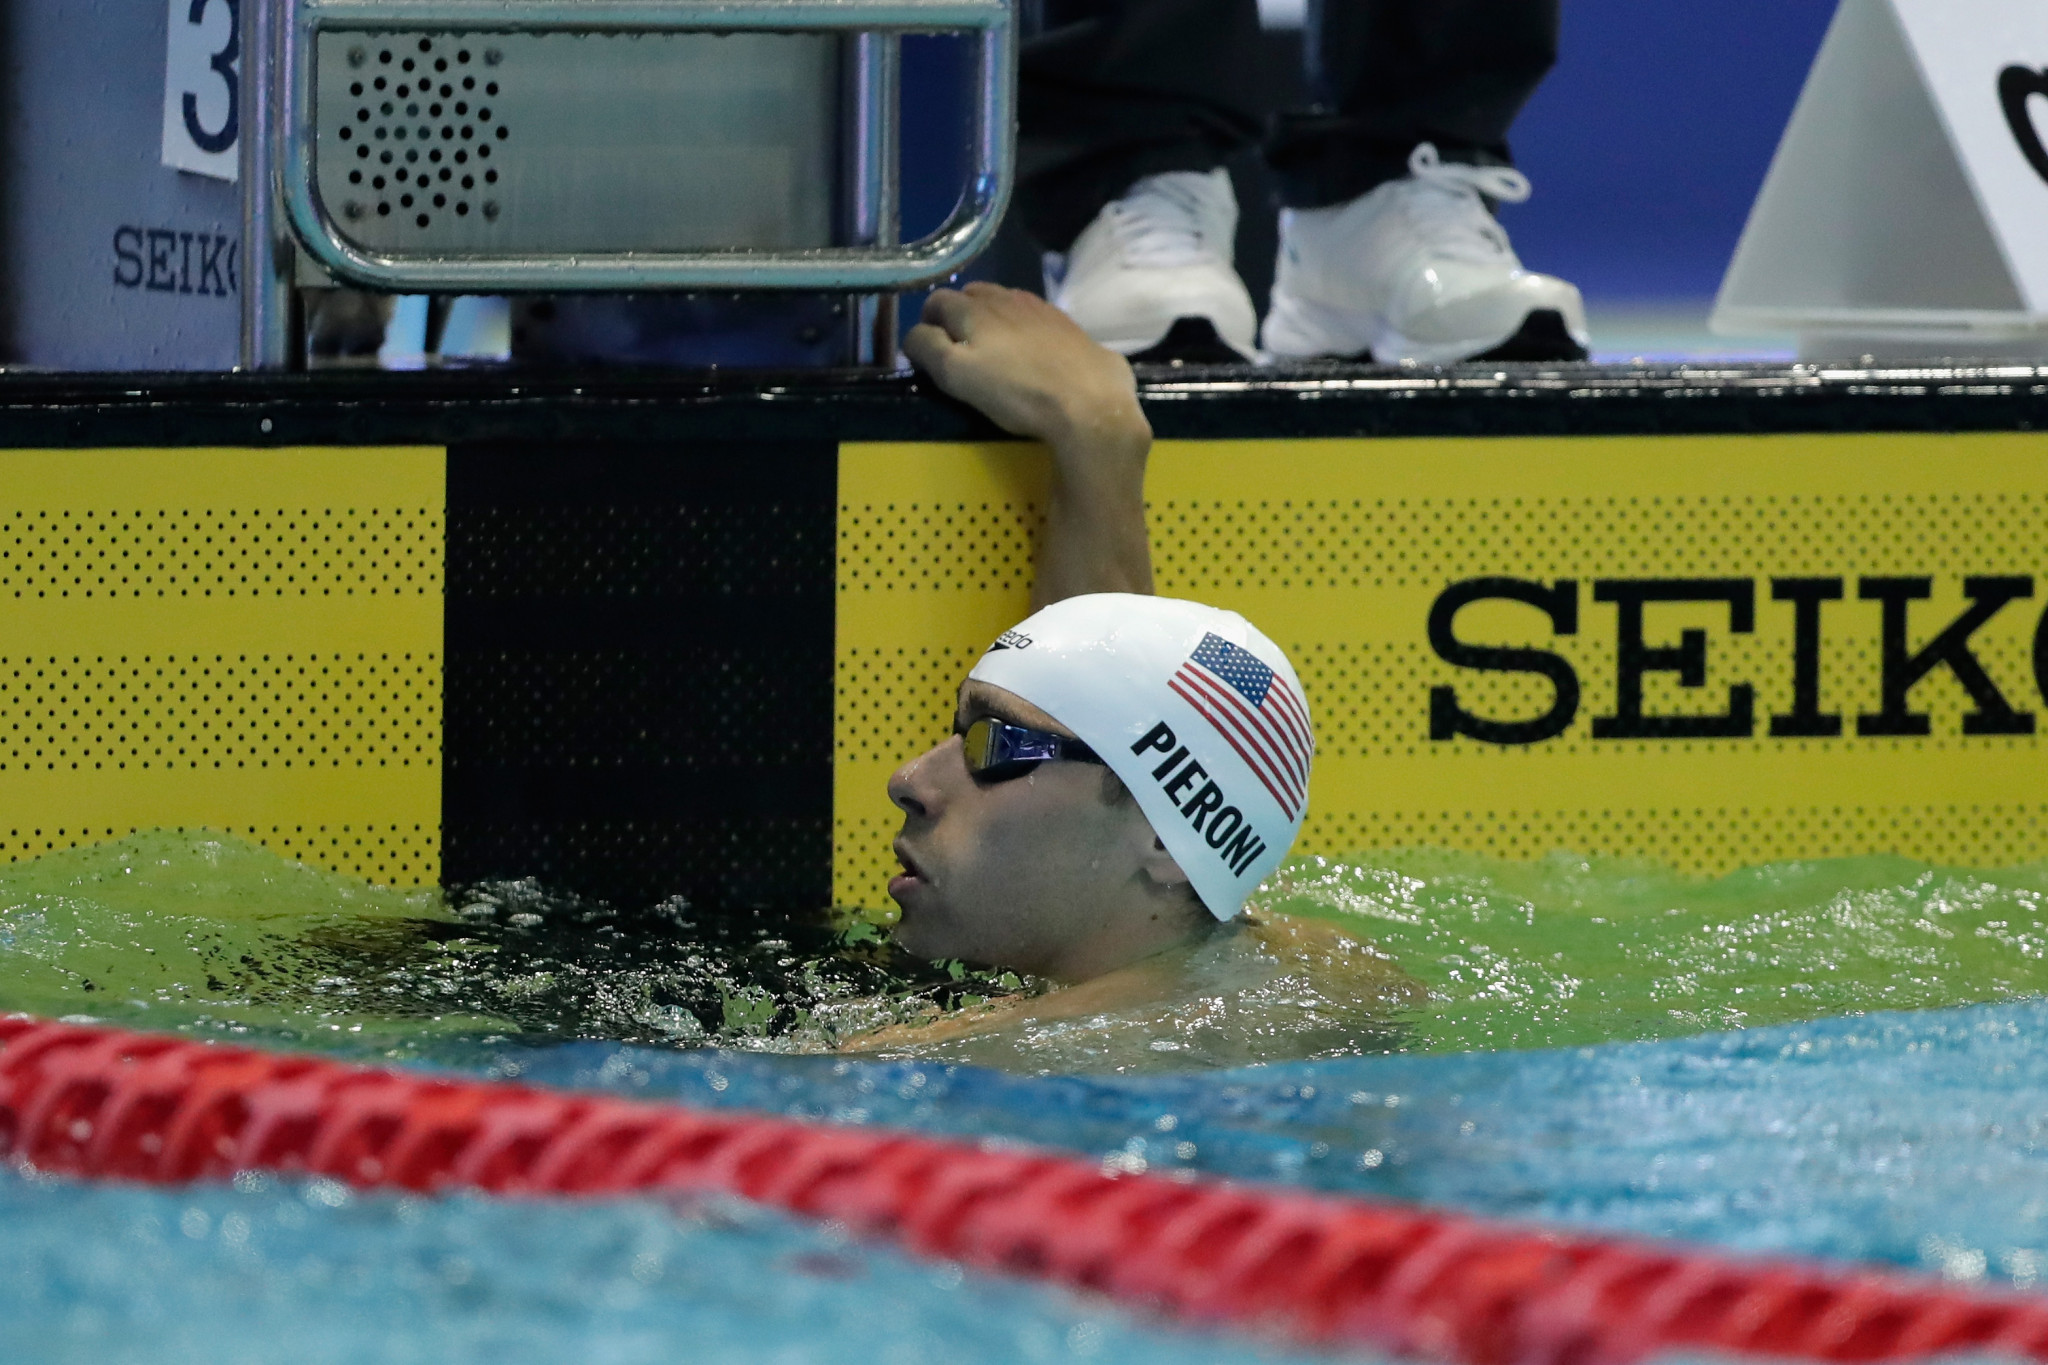 Blake Pieroni from the US set a new World Cup record in the men's 100m freestyle 